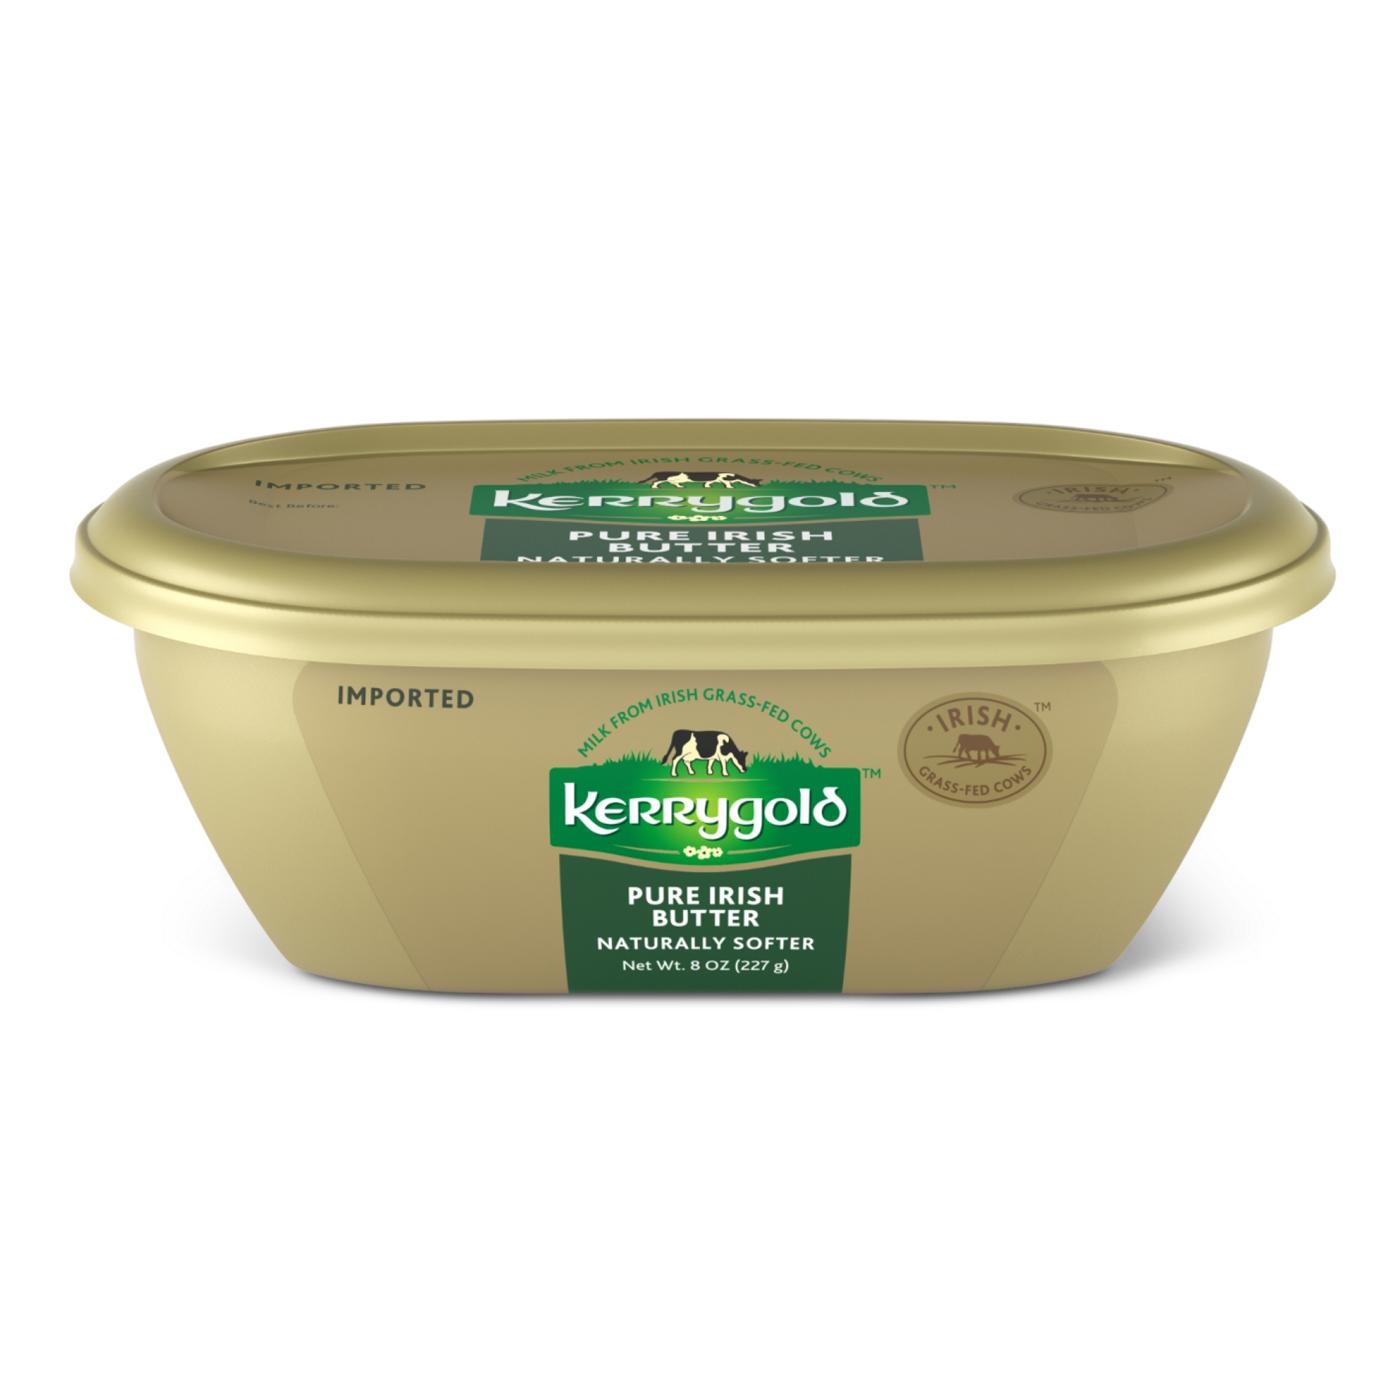 Kerrygold Grass-Fed Naturally Softer Pure Irish Butter; image 1 of 3